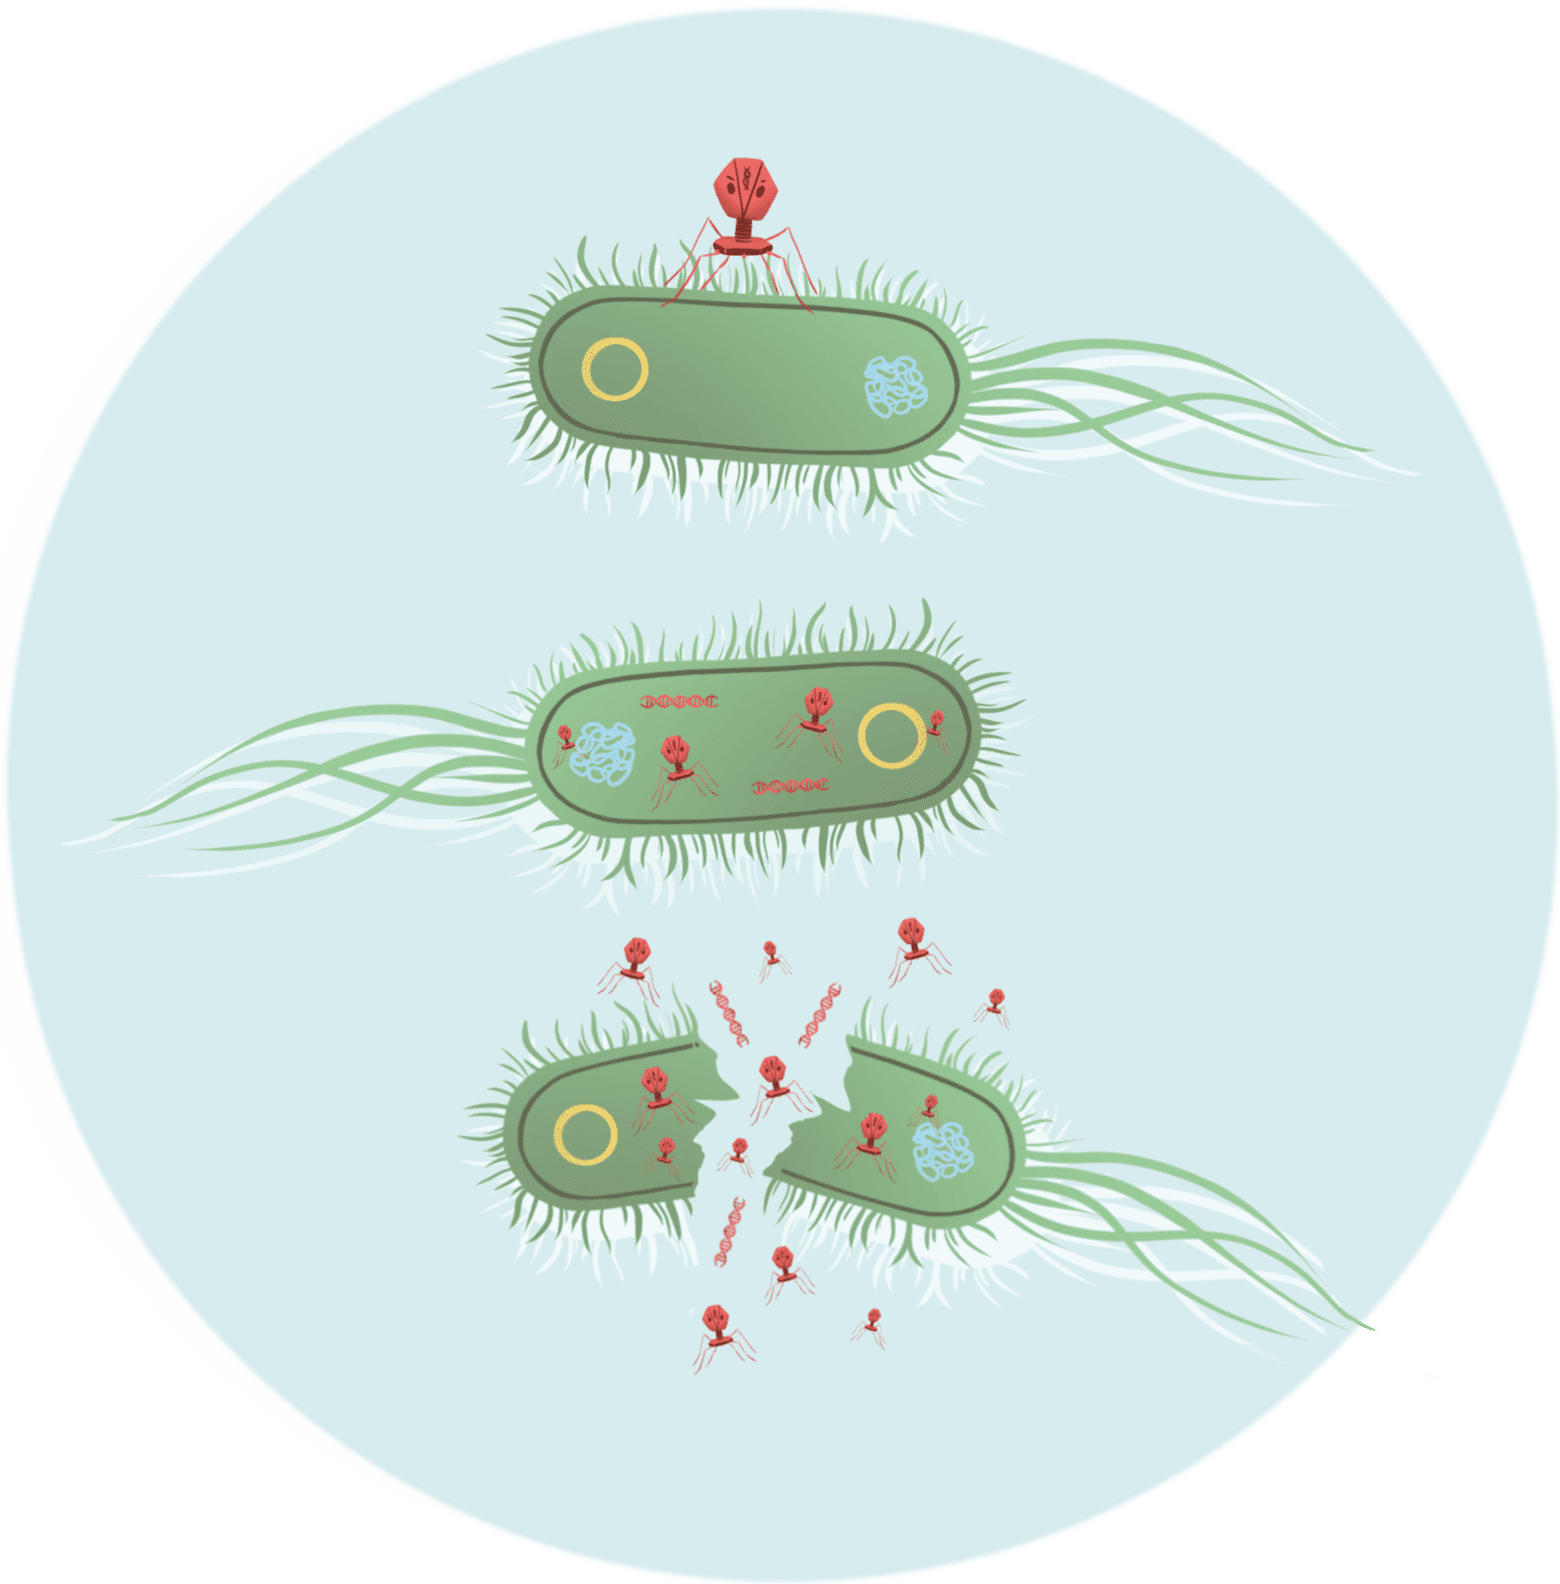 Illustration a phage injecting DNA into an E. Coli, reproducing within the bacterial cell, and eventually lysing it, releasing more phages